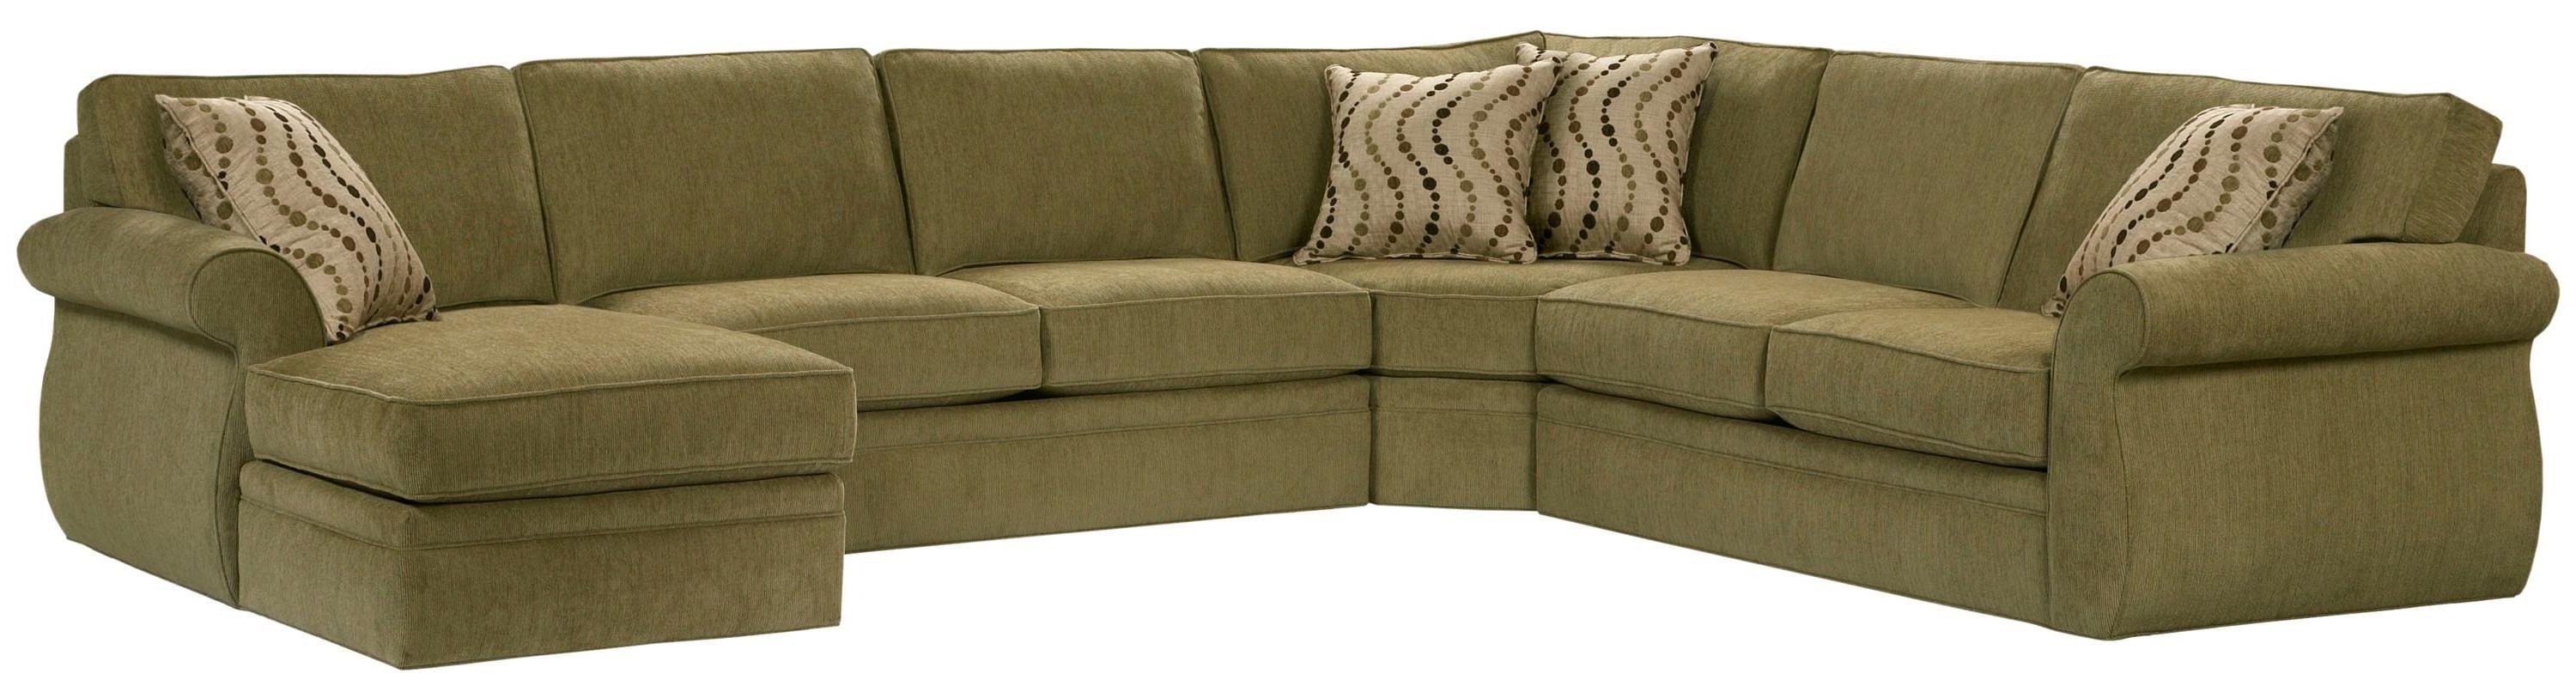 Broyhill Furniture Veronica Right Arm Facing Customizable Chaise Within Famous Broyhill Sectional Sofas (View 1 of 15)